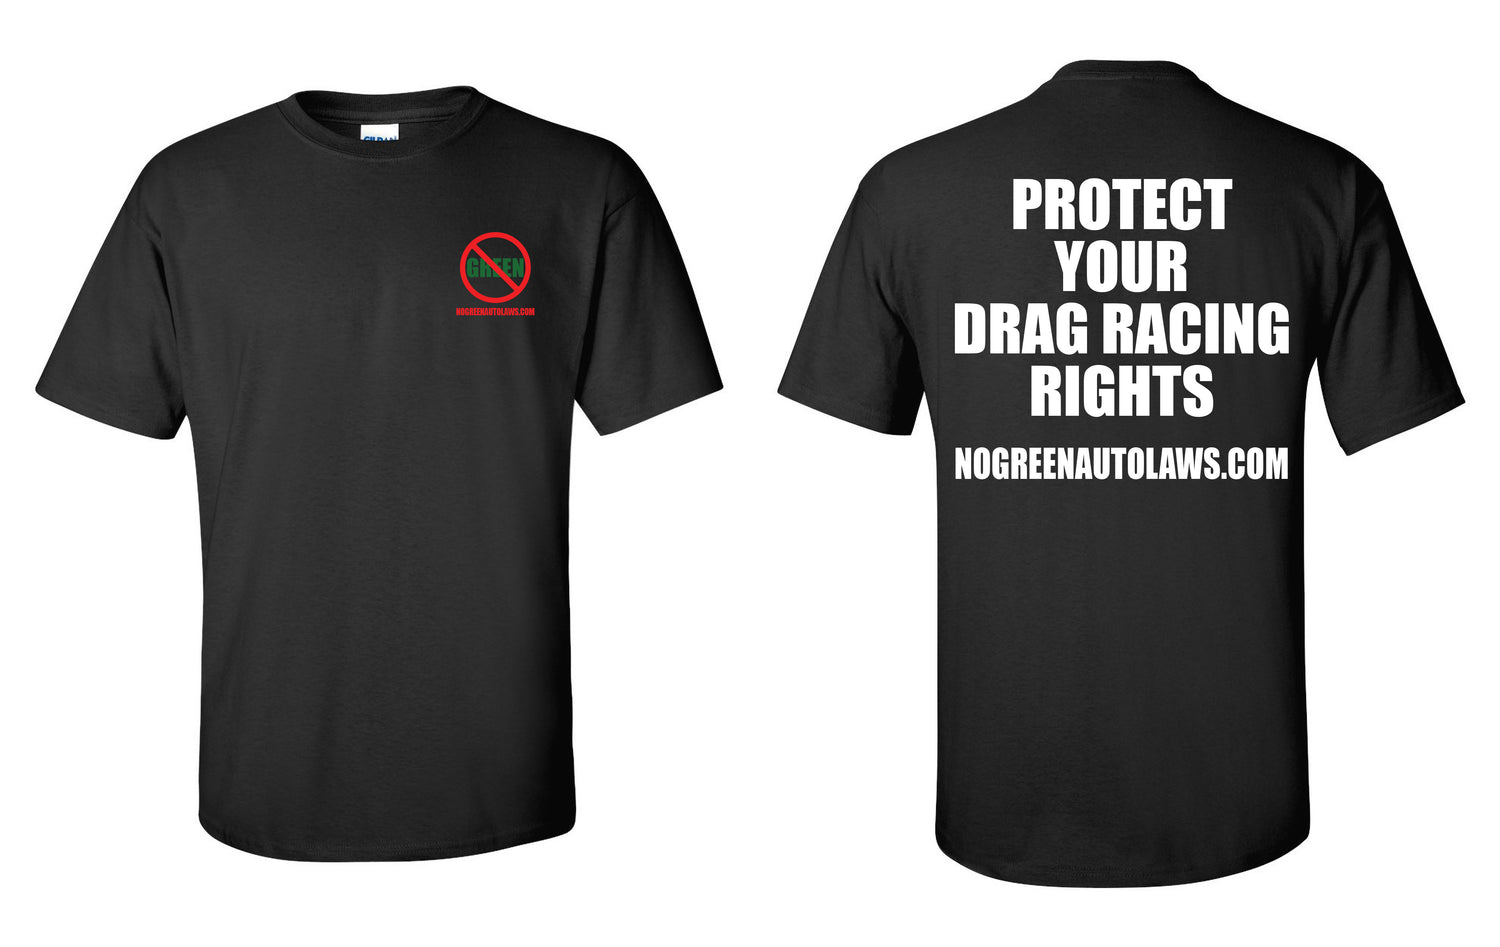 GET ALL PROTECT YOUR DRAG RACING RIGHTS MERCHANDISE HERE!